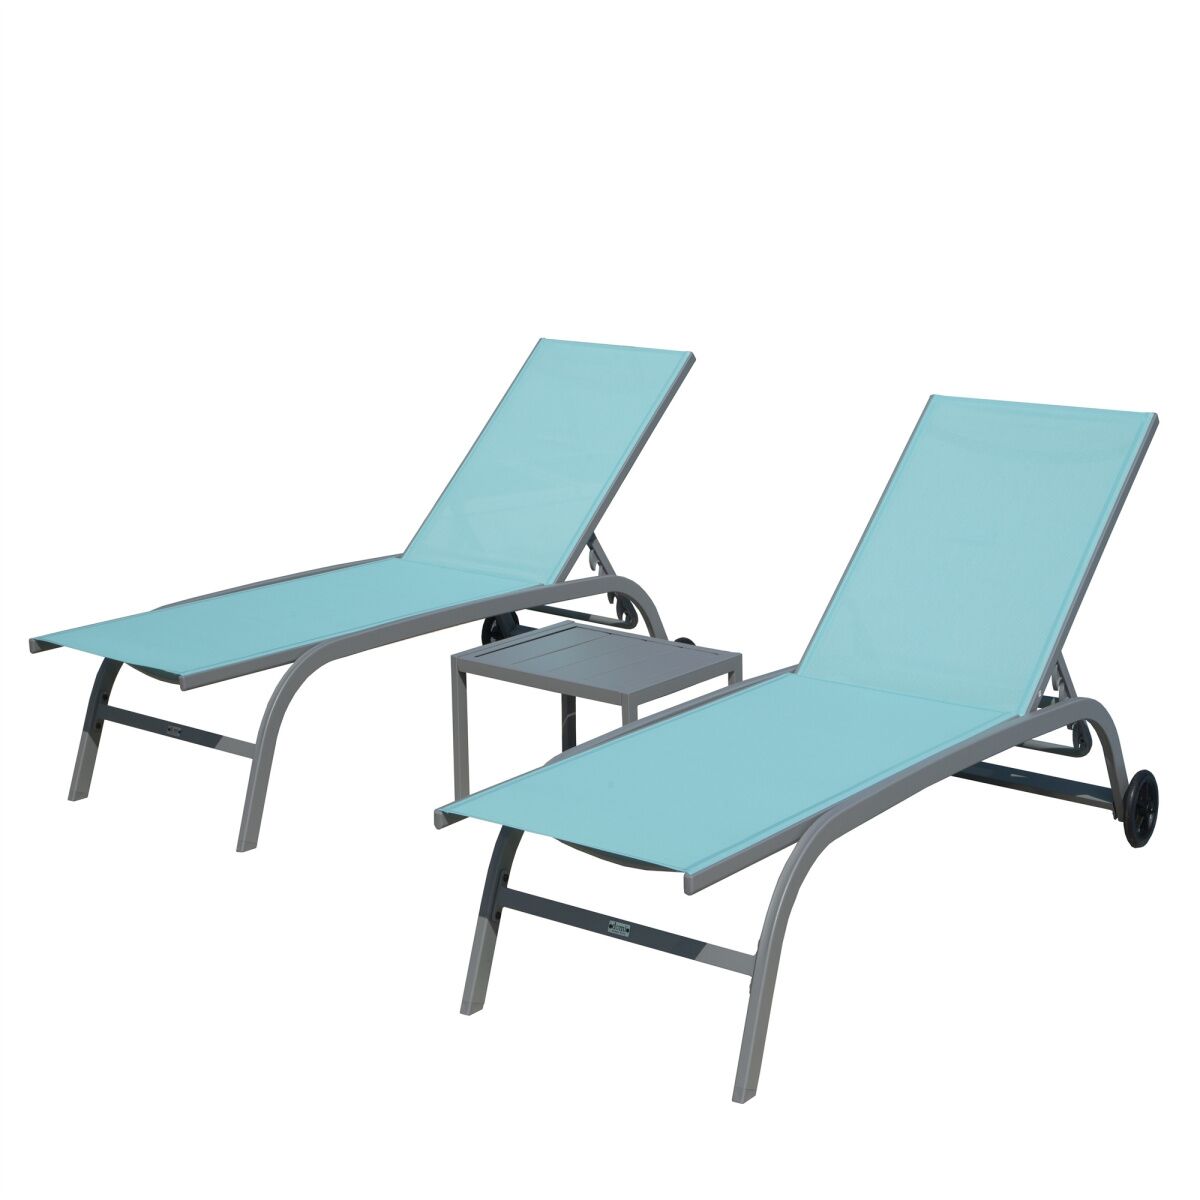 Simplie Fun Chaise Lounge Outdoor Set of 3, Lounge Chairs for Outside with Wheels, Outdoor Lounge Chairs with 5 Adjustable Position, Pool Lounge Chairs for Patio,